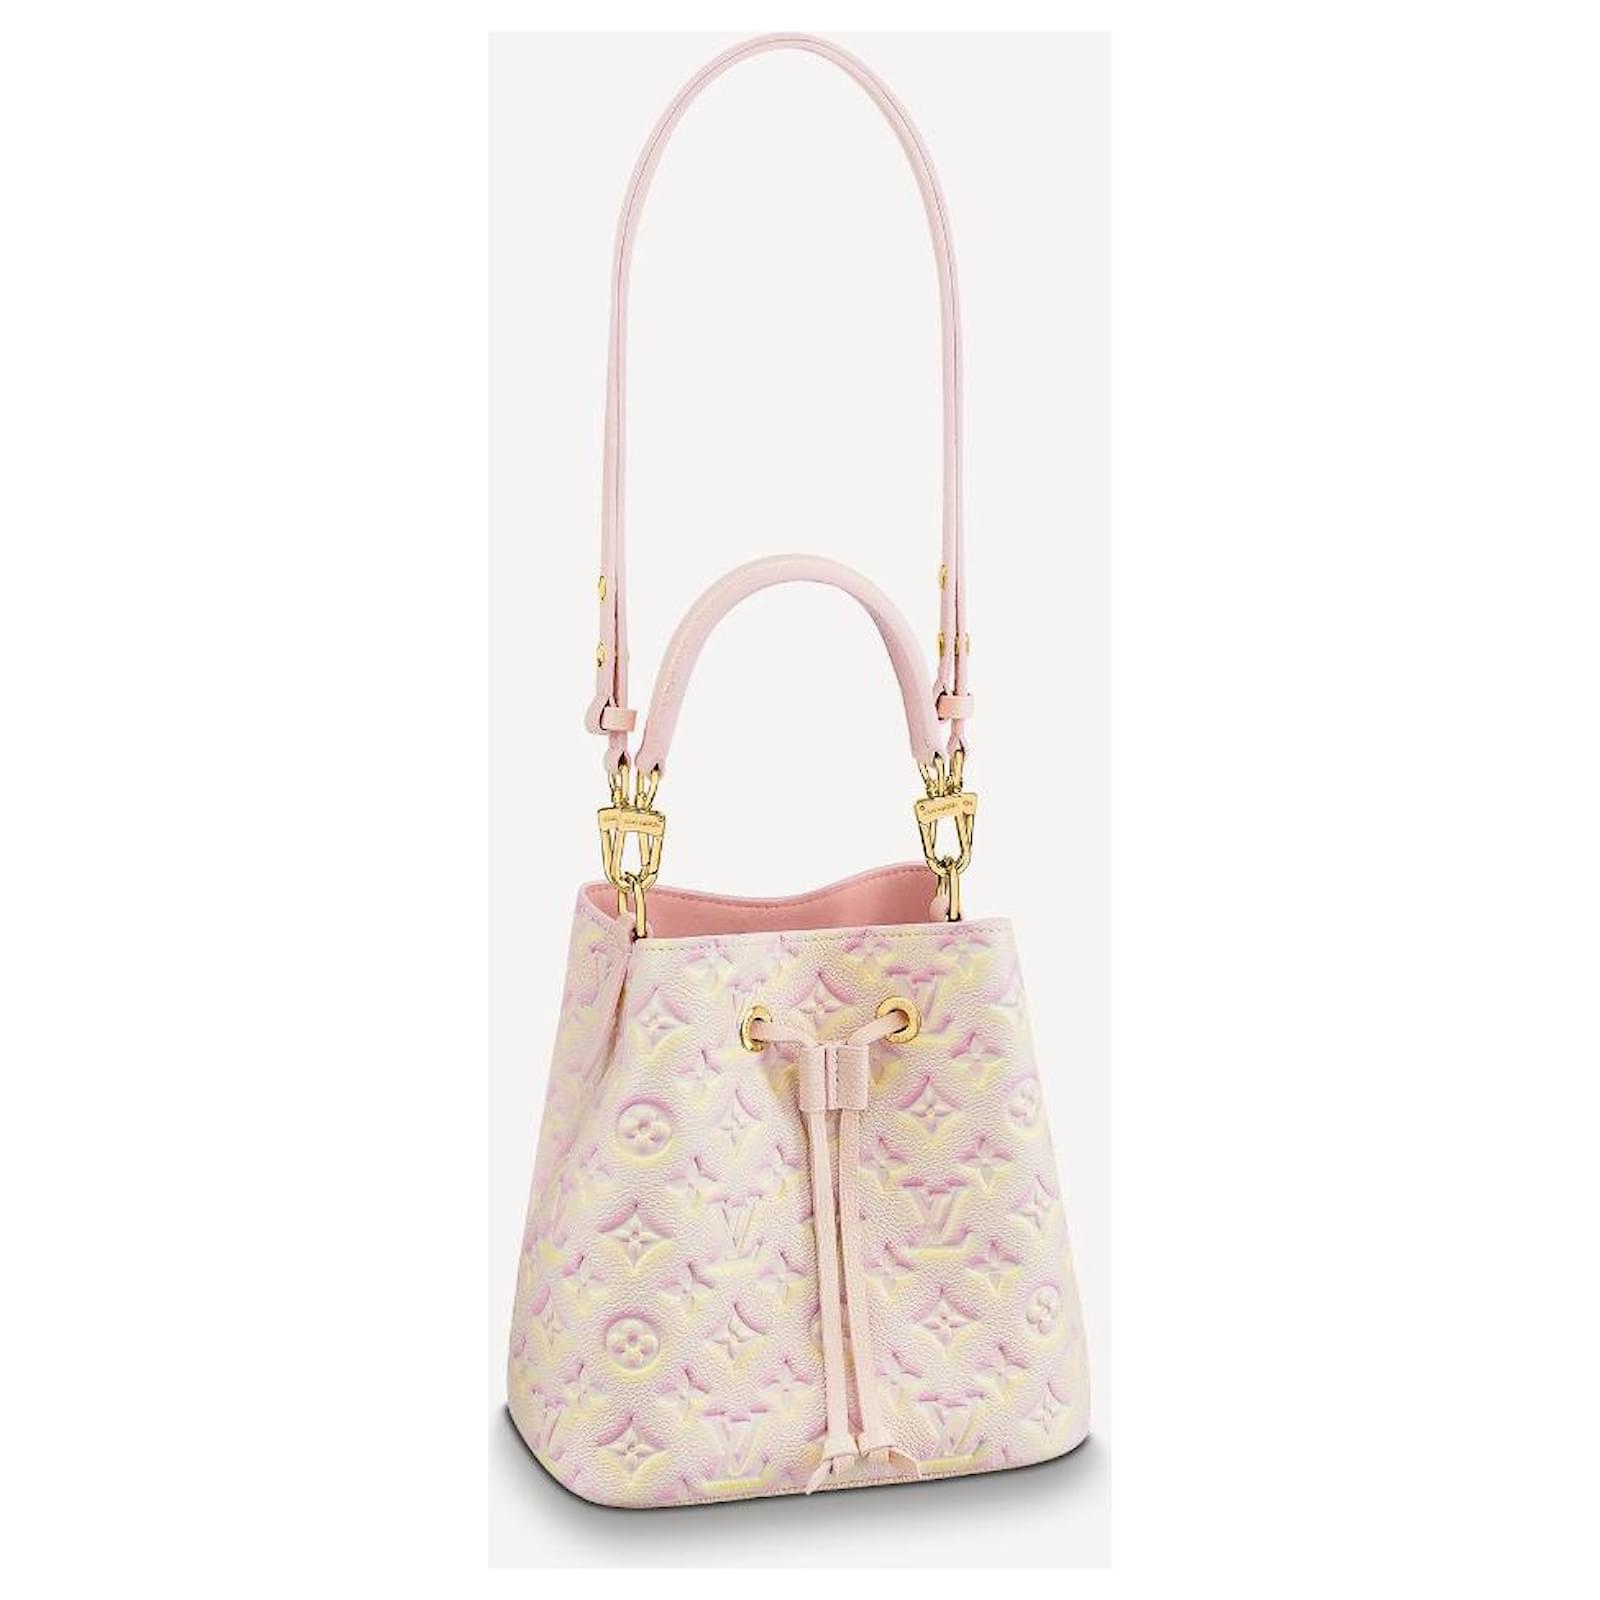 LIMITED Empreinte NWT LOUIS VUITTON STARDUST PINK NEO NOE TOTE BAG